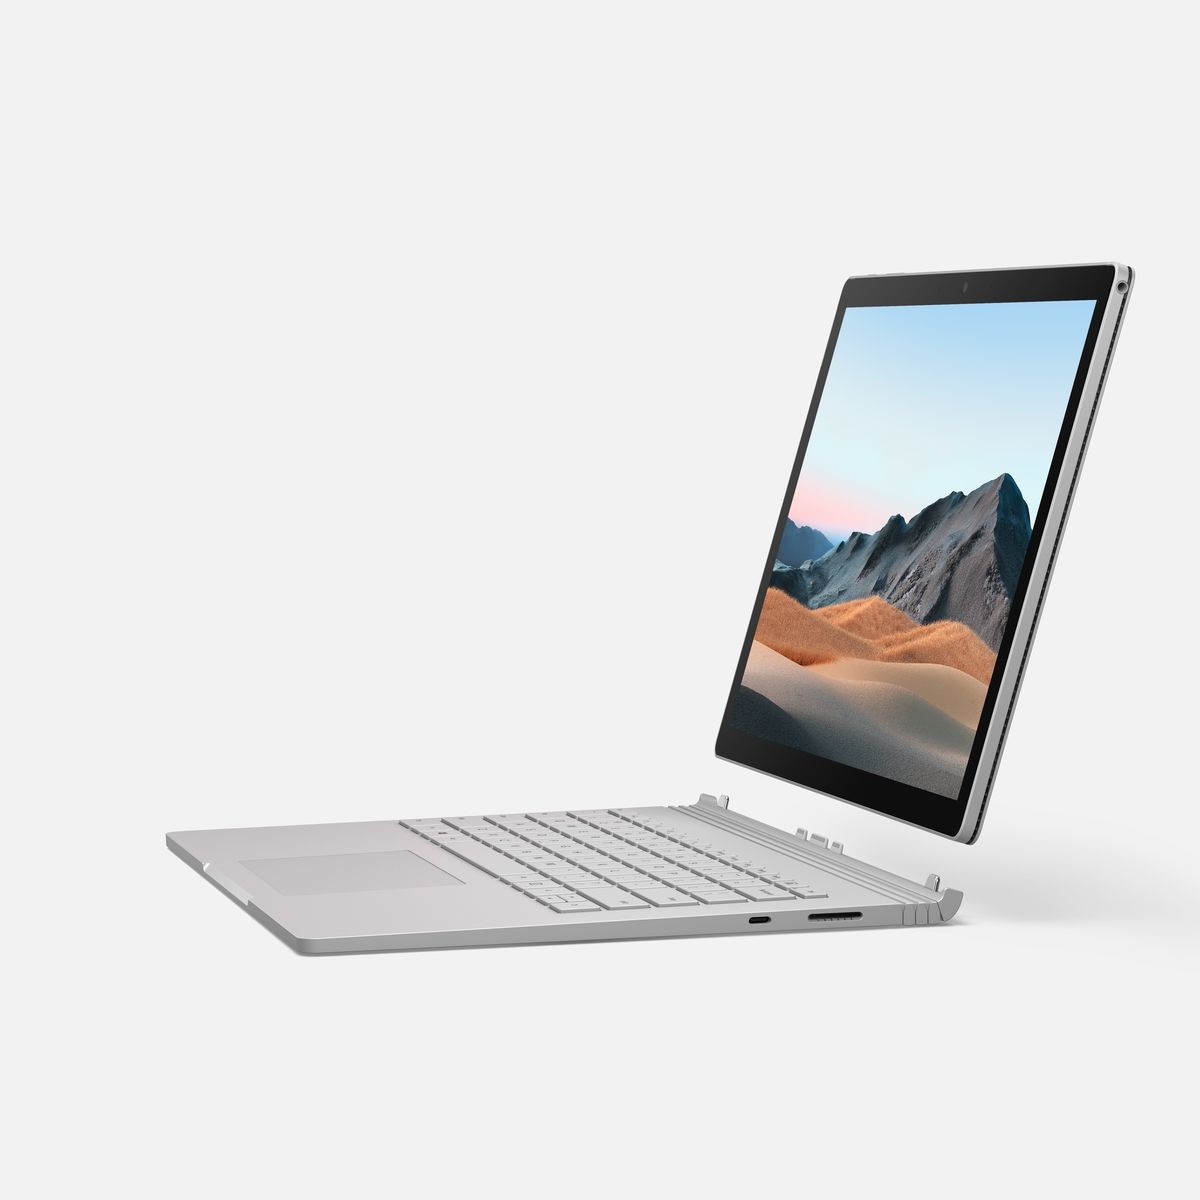 Microsoft Surface Book 3 All-in-One Business Laptop i7 1065G7/10th Gen/16GB/256GB SSD/NVIDIA GeForce GTX 1650 4GB/13.5-inch Display/Windows 10/Platinum